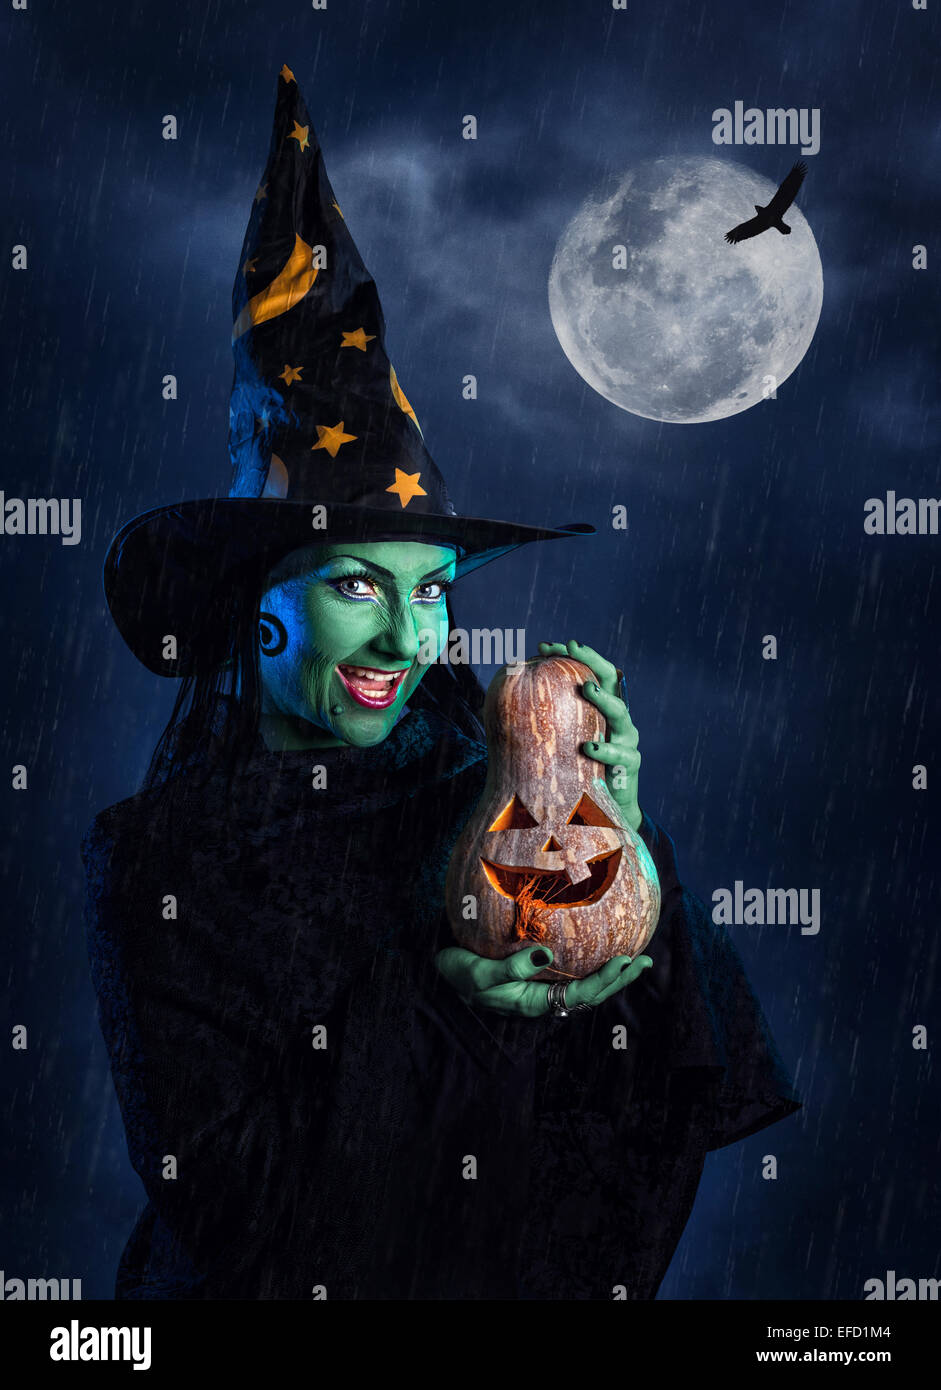 Witch with green skin holding carved Halloween pumpkin at moon and dark sky with rain Stock Photo